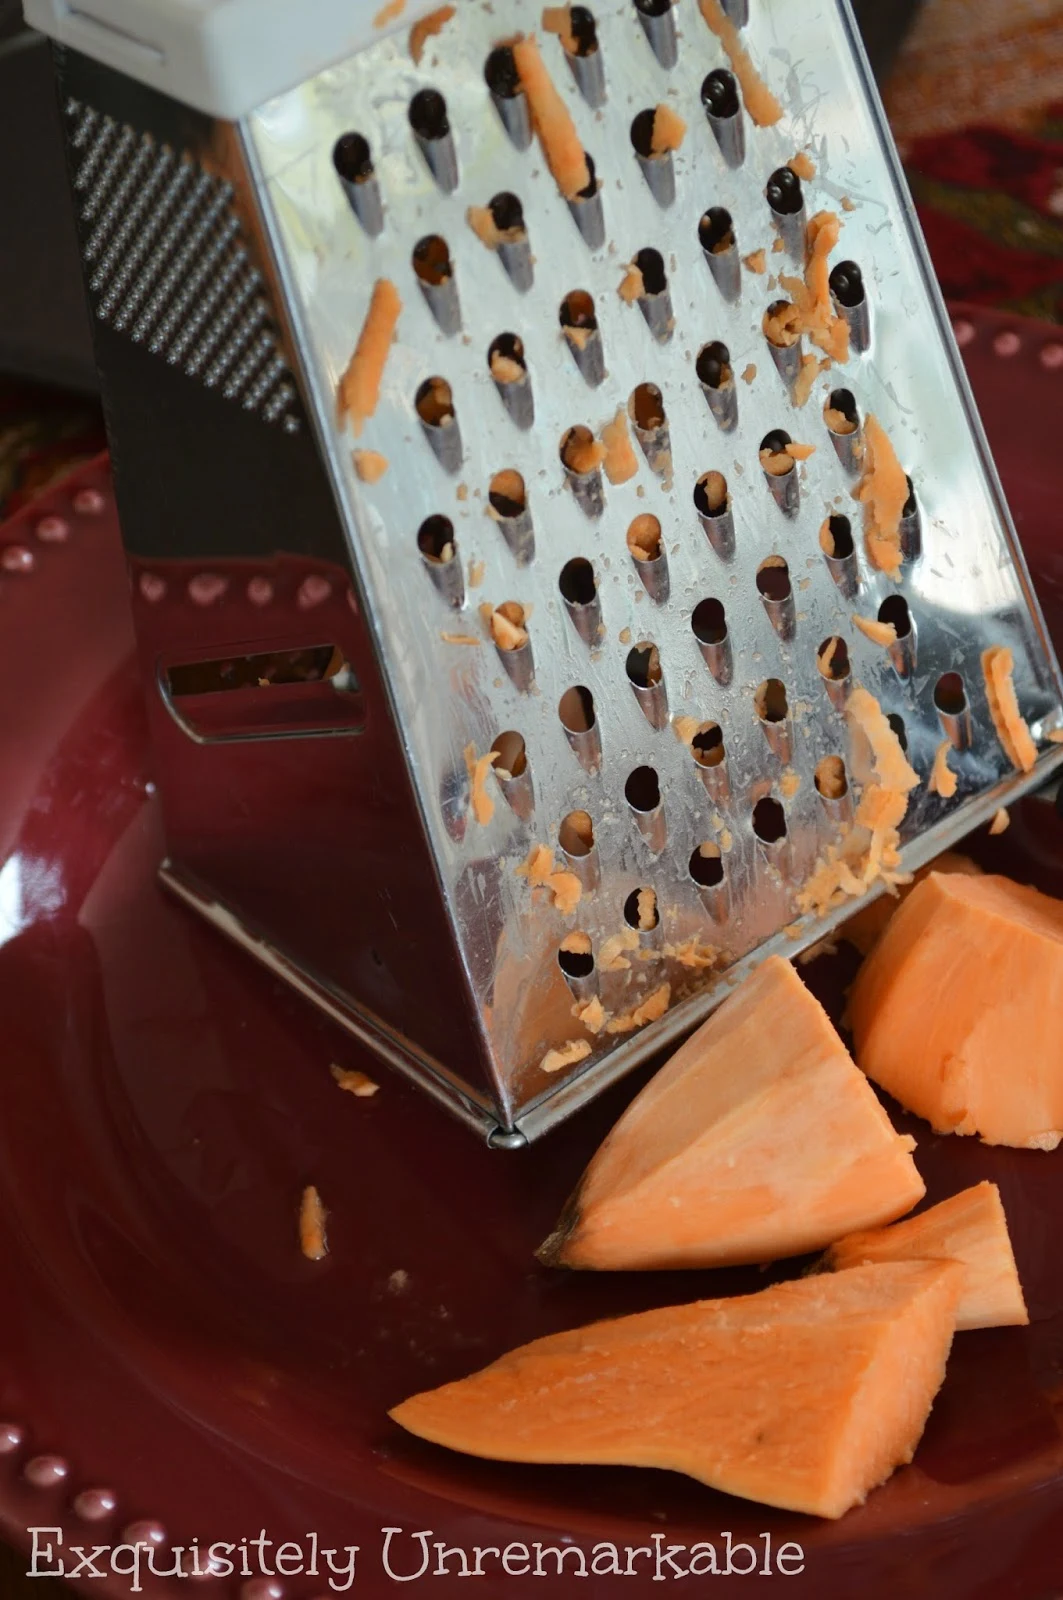 Shredding a sweet potato with a grater